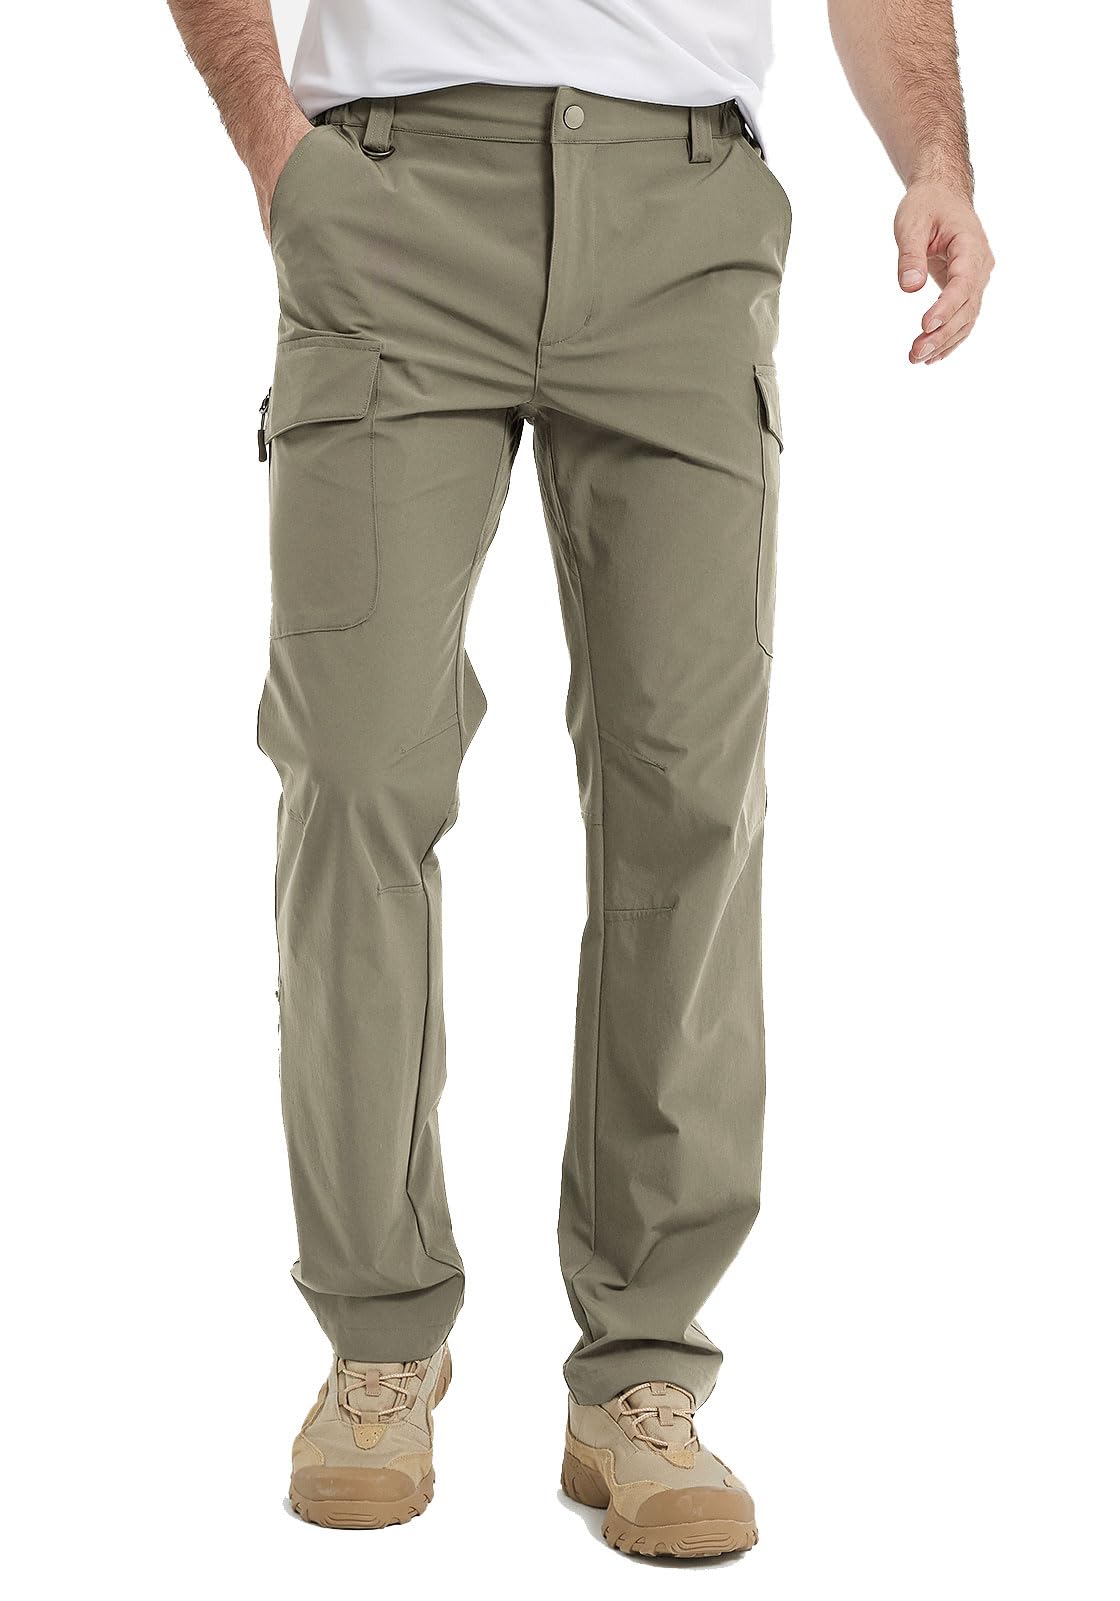 Moosehill Men's-Golf-Pants-Classic-Fit Stretch Quick Dry Lightweight Dress  Work Casual Outdoor Comfy Trousers with Pockets